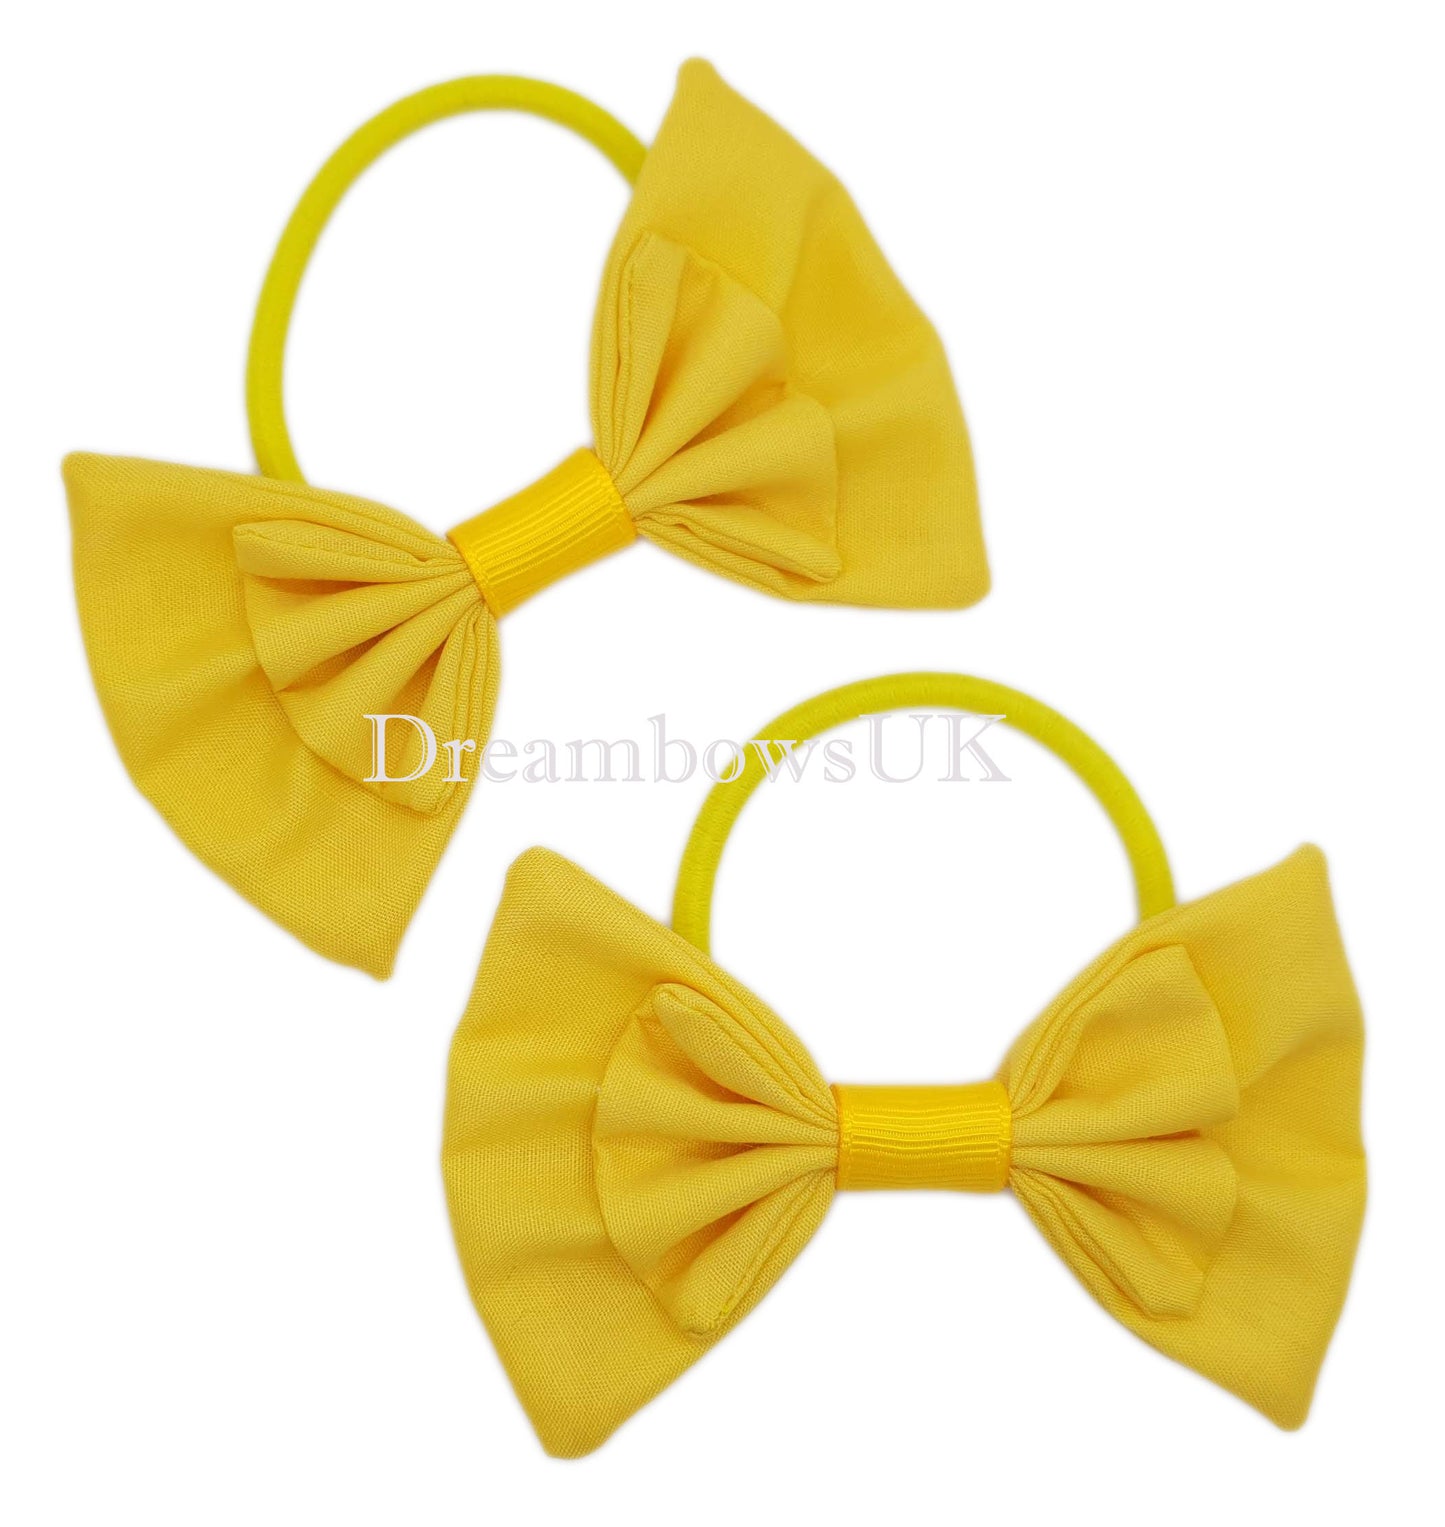 Golden yellow fabric hair bows on thick hair ties